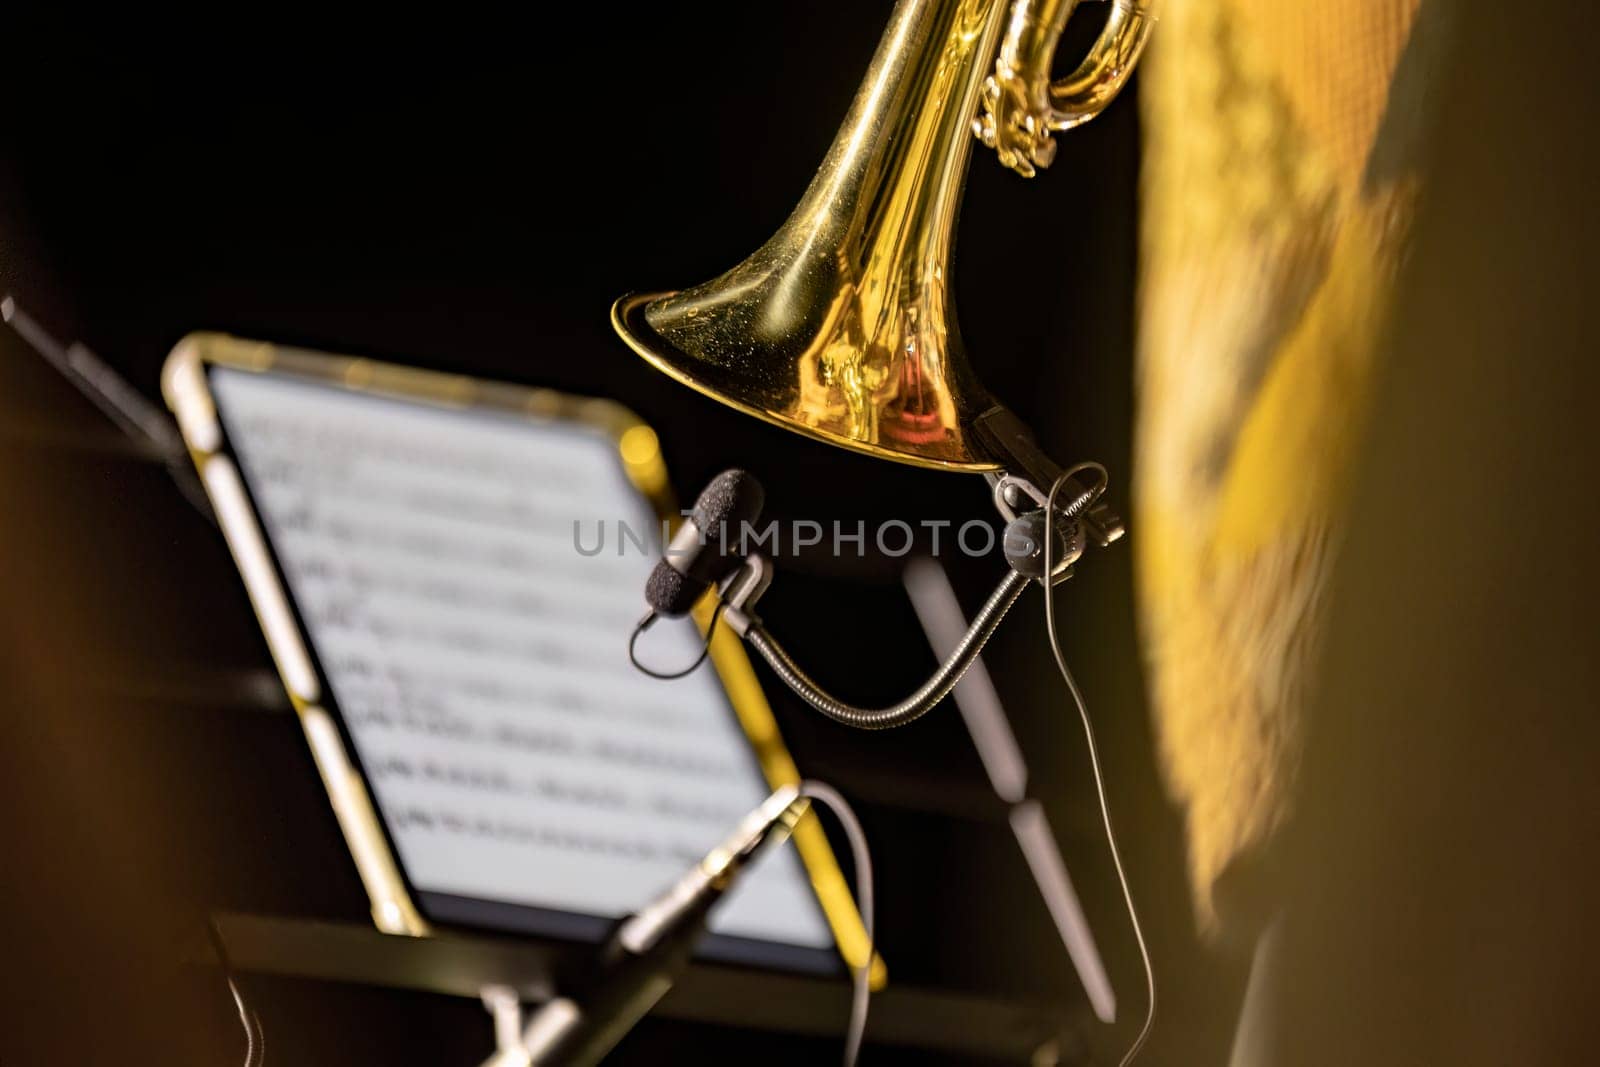 Close-up of a musician's hands playing the trumpet during a vibrant live performance at night